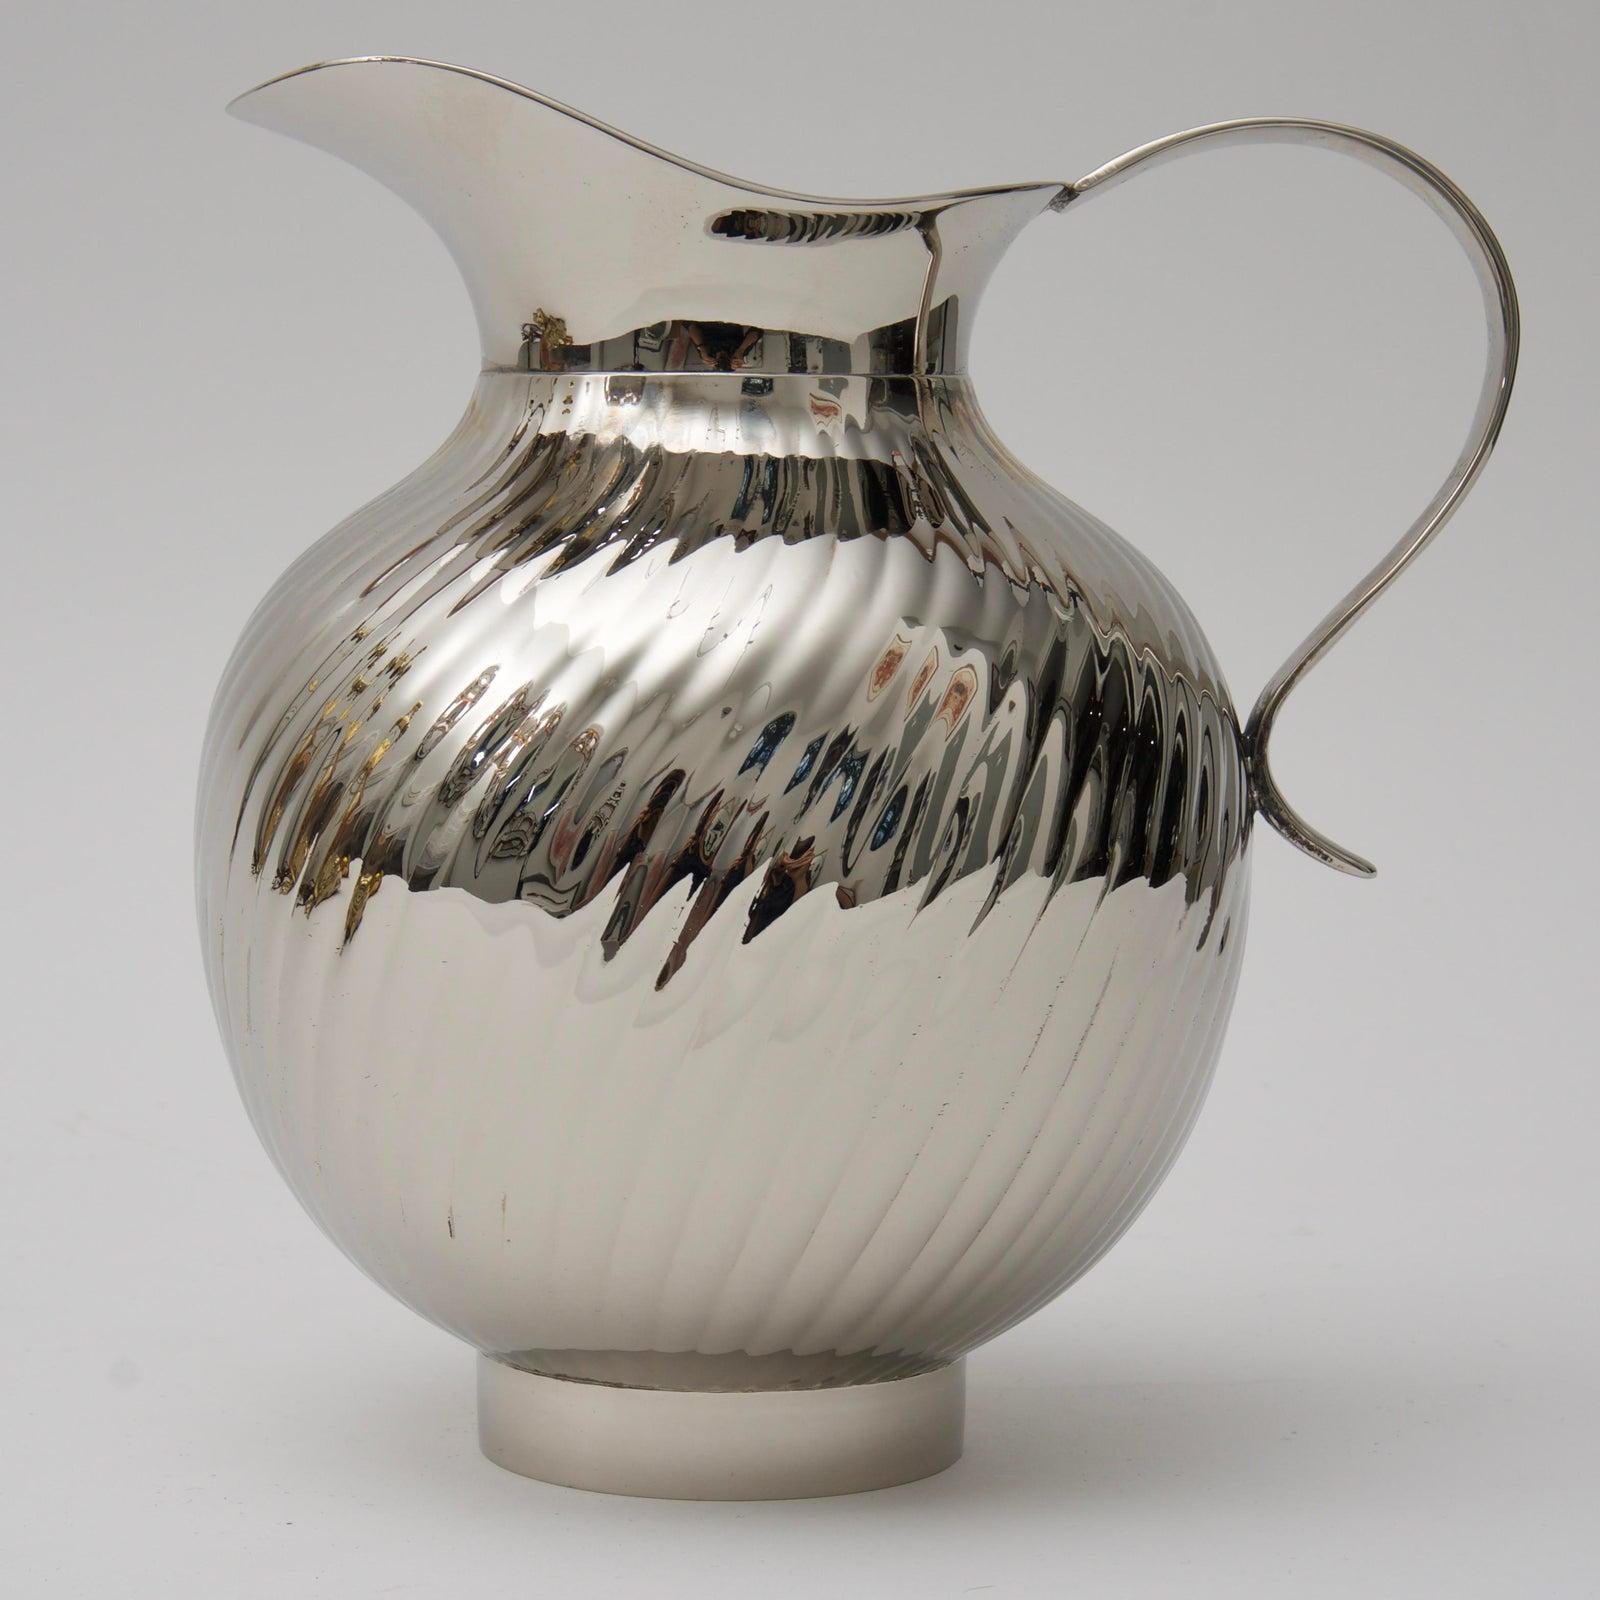 American Classical Nickel-Plated Water Pitcher